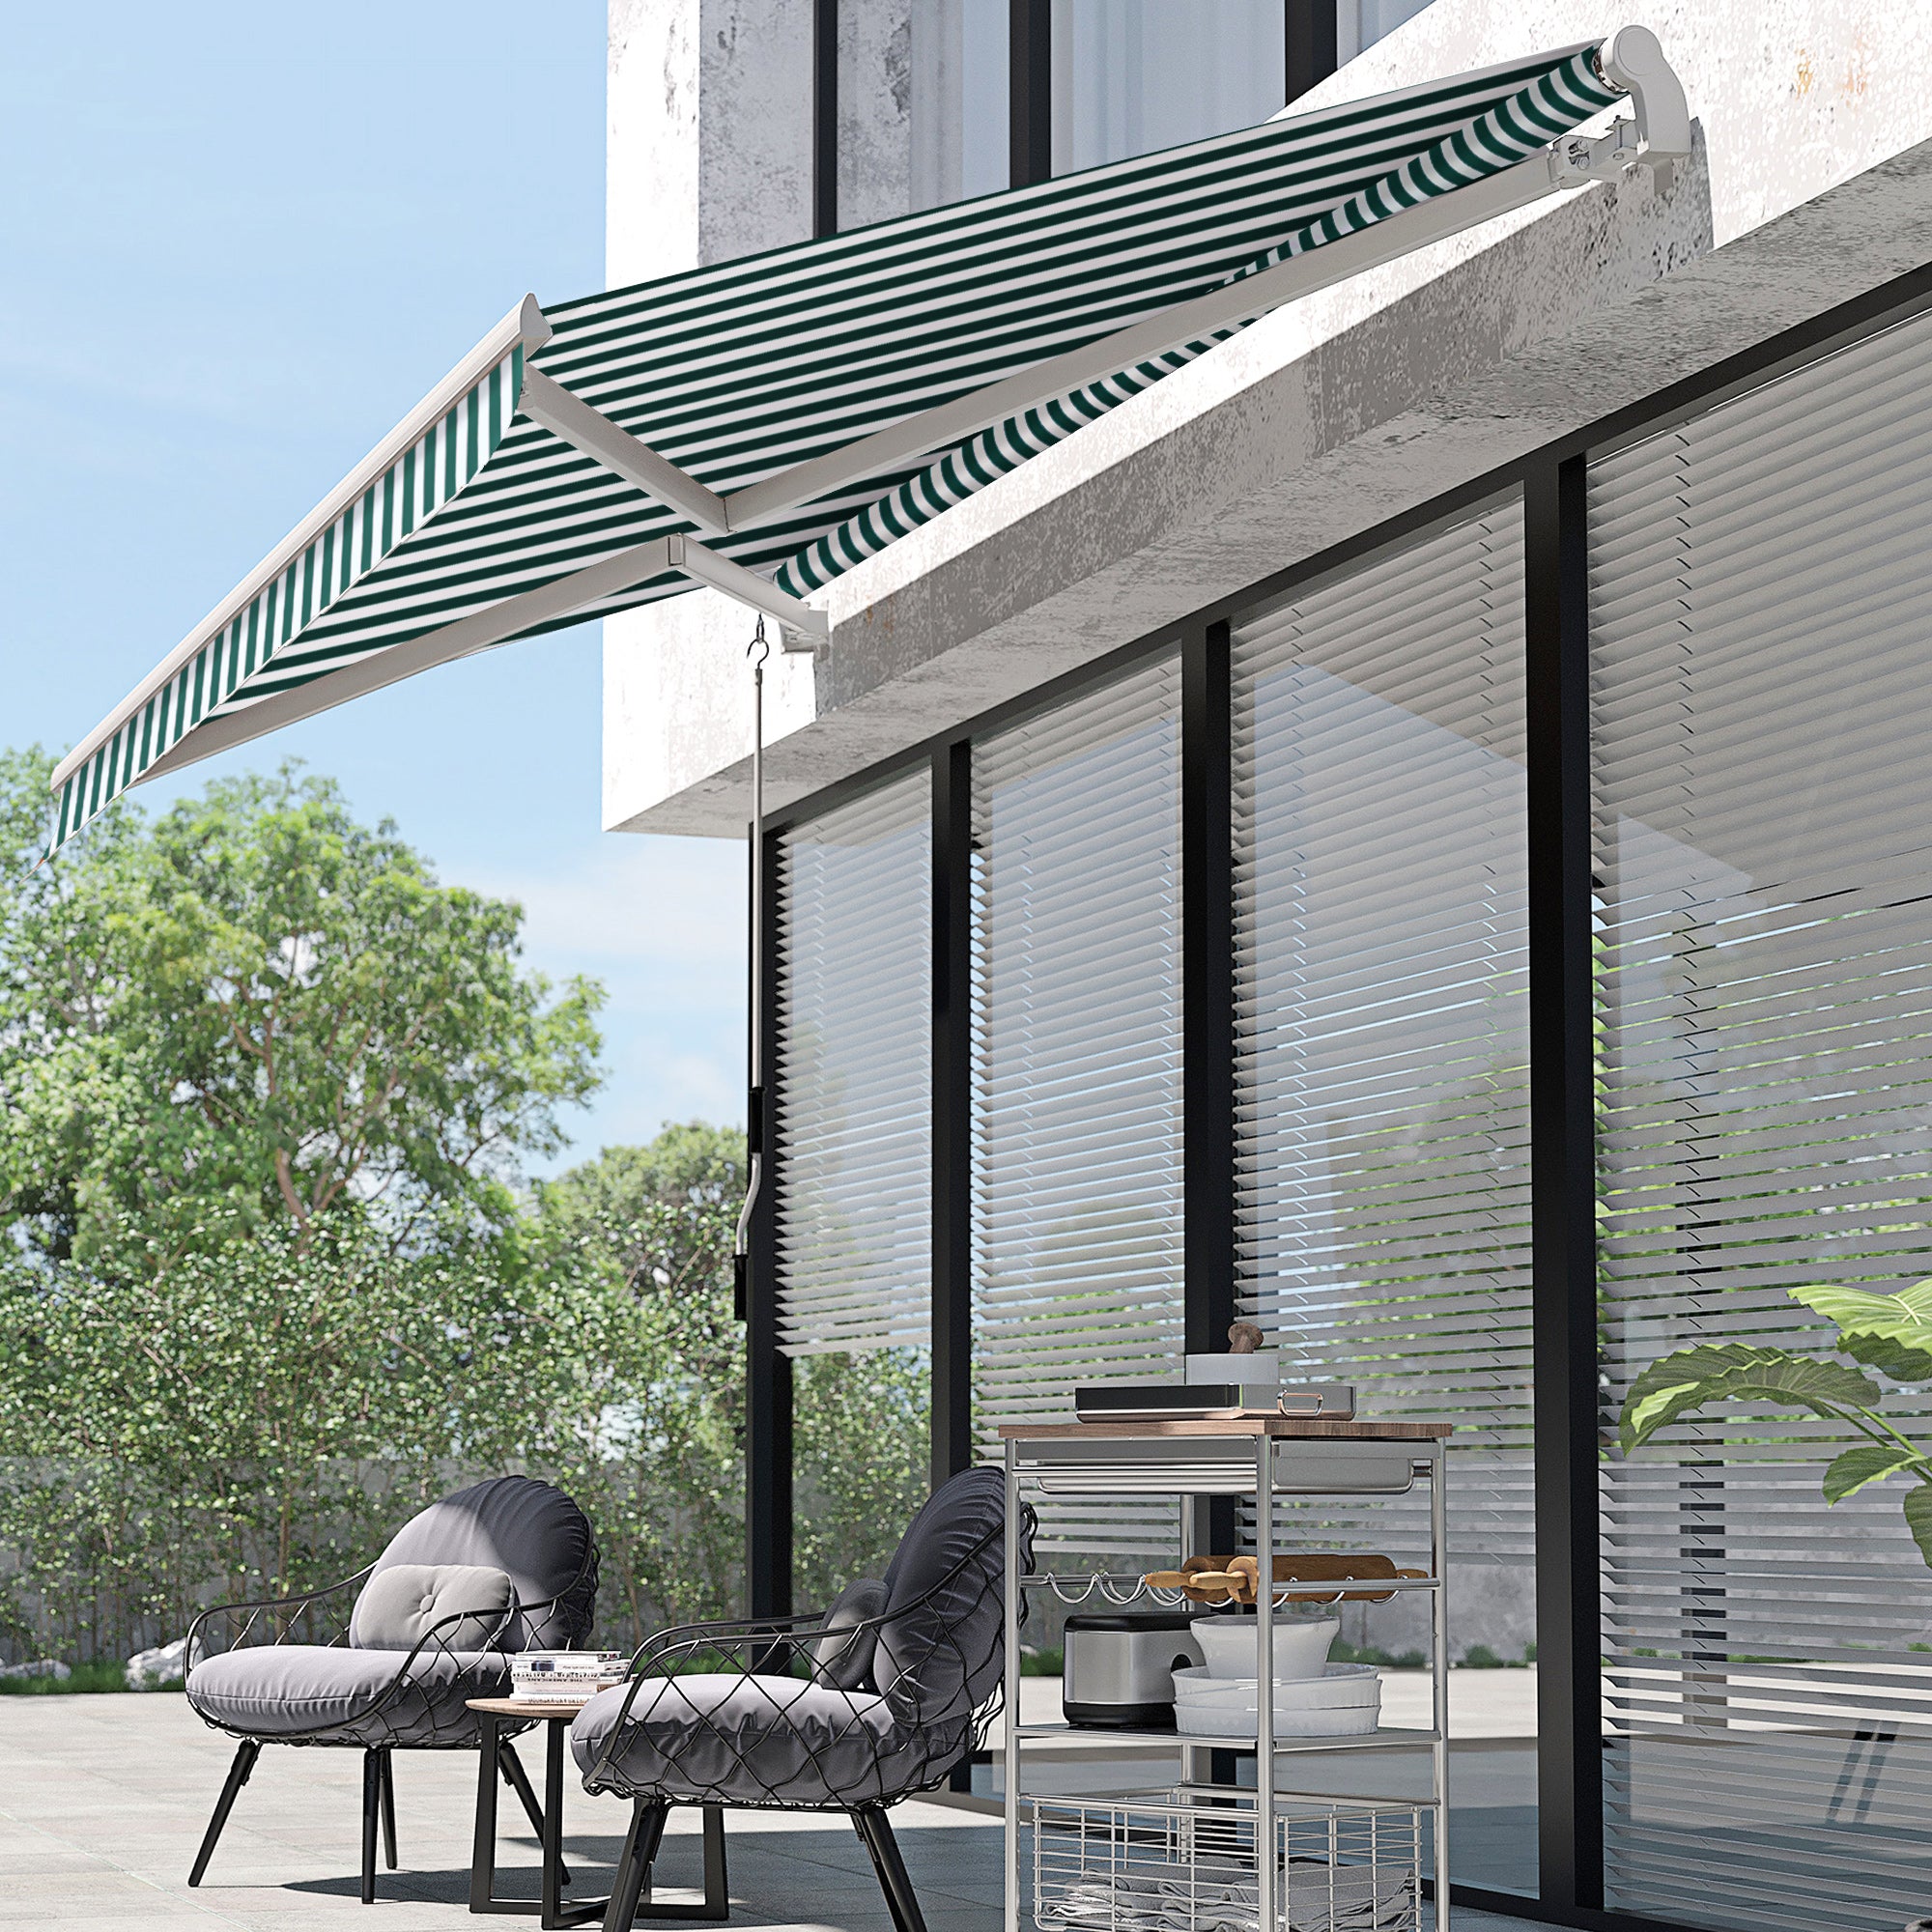 Outsunny 3m x 2.5m Garden Patio Manual Awning Canopy Sun Shade Shelter with Winding Handle Retractable - Green/White - Inspirely